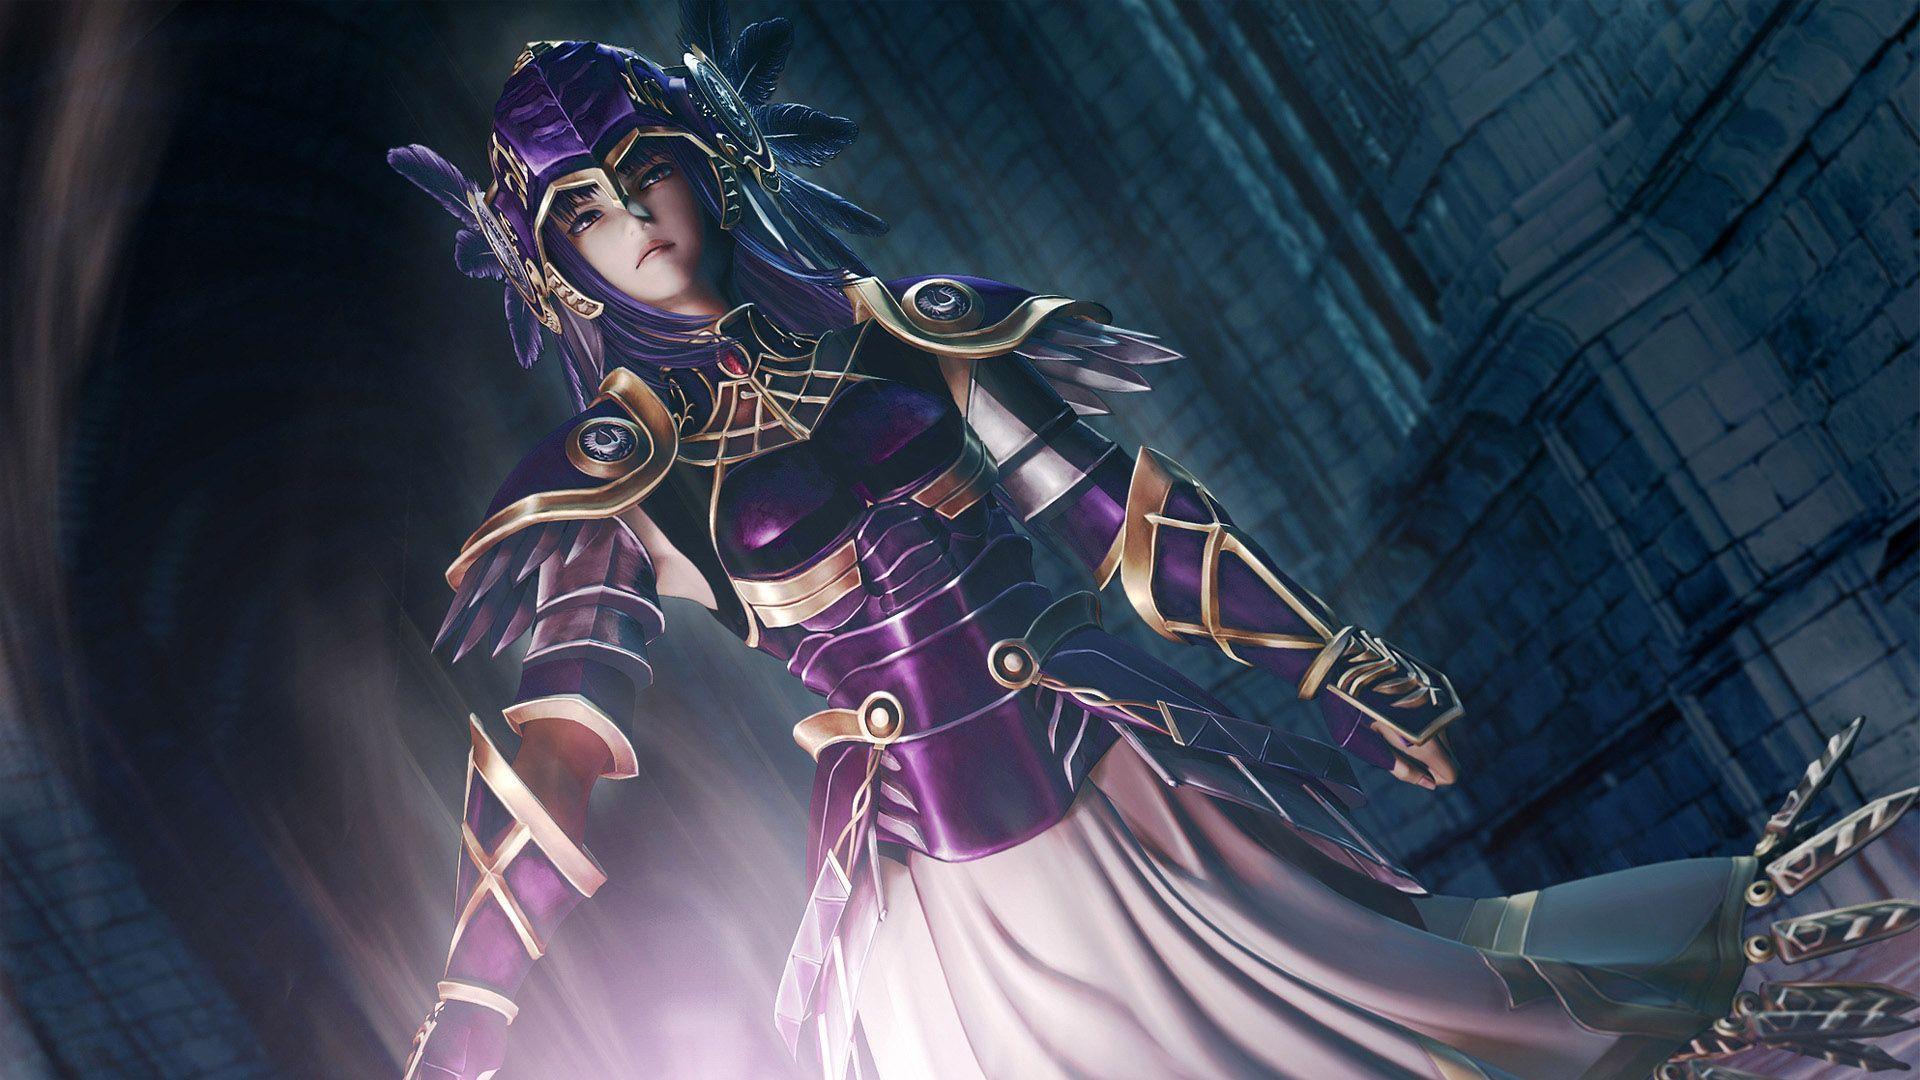 image For > Valkyrie Profile Wallpaper